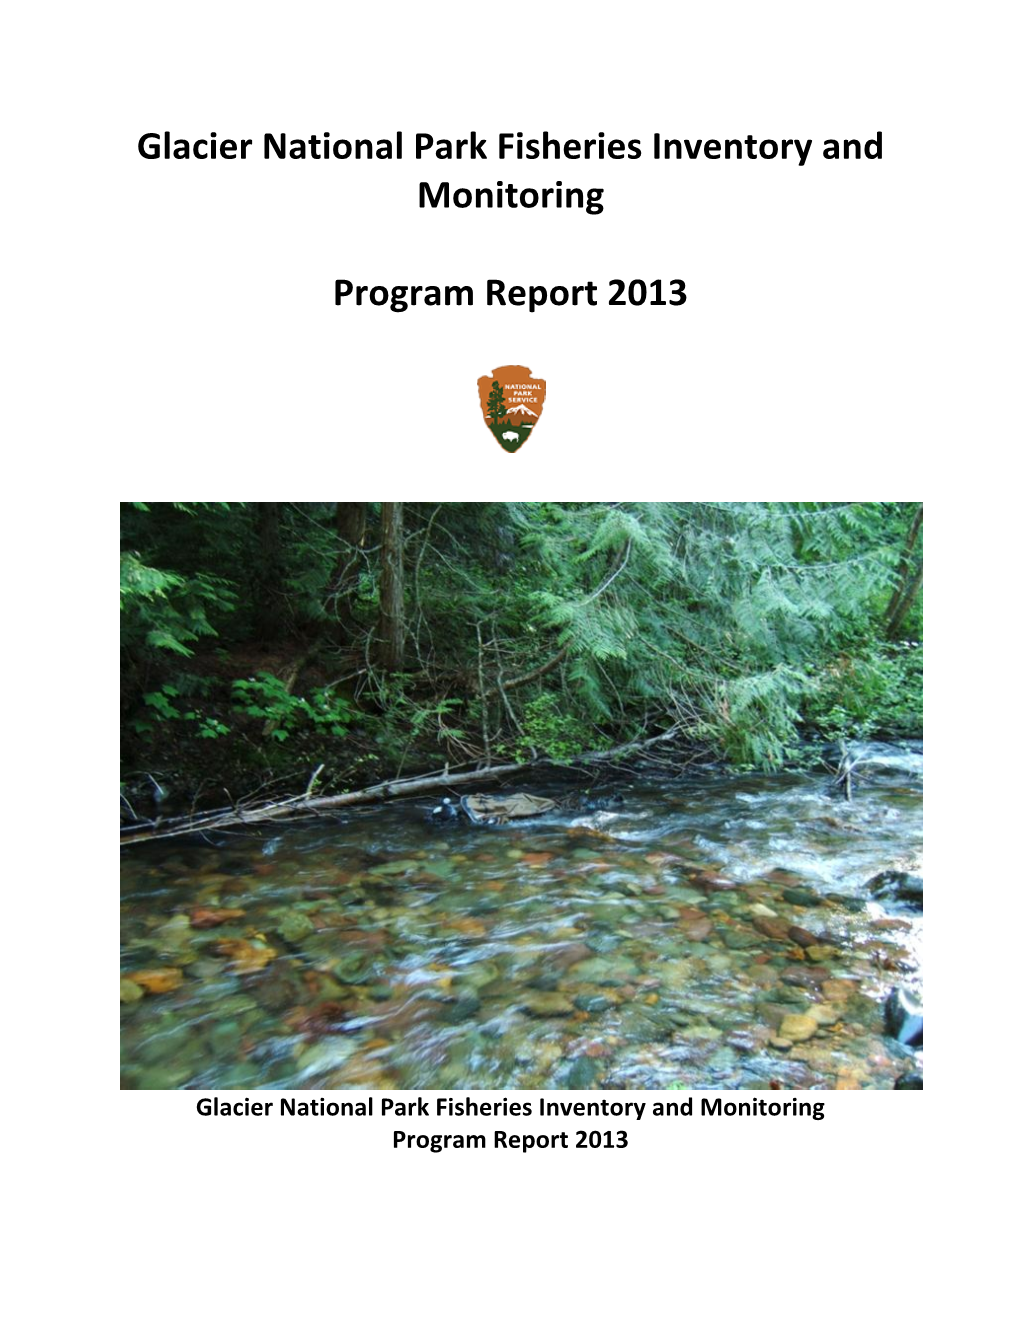 Glacier National Park Fisheries Inventory and Monitoring Program Report 2013